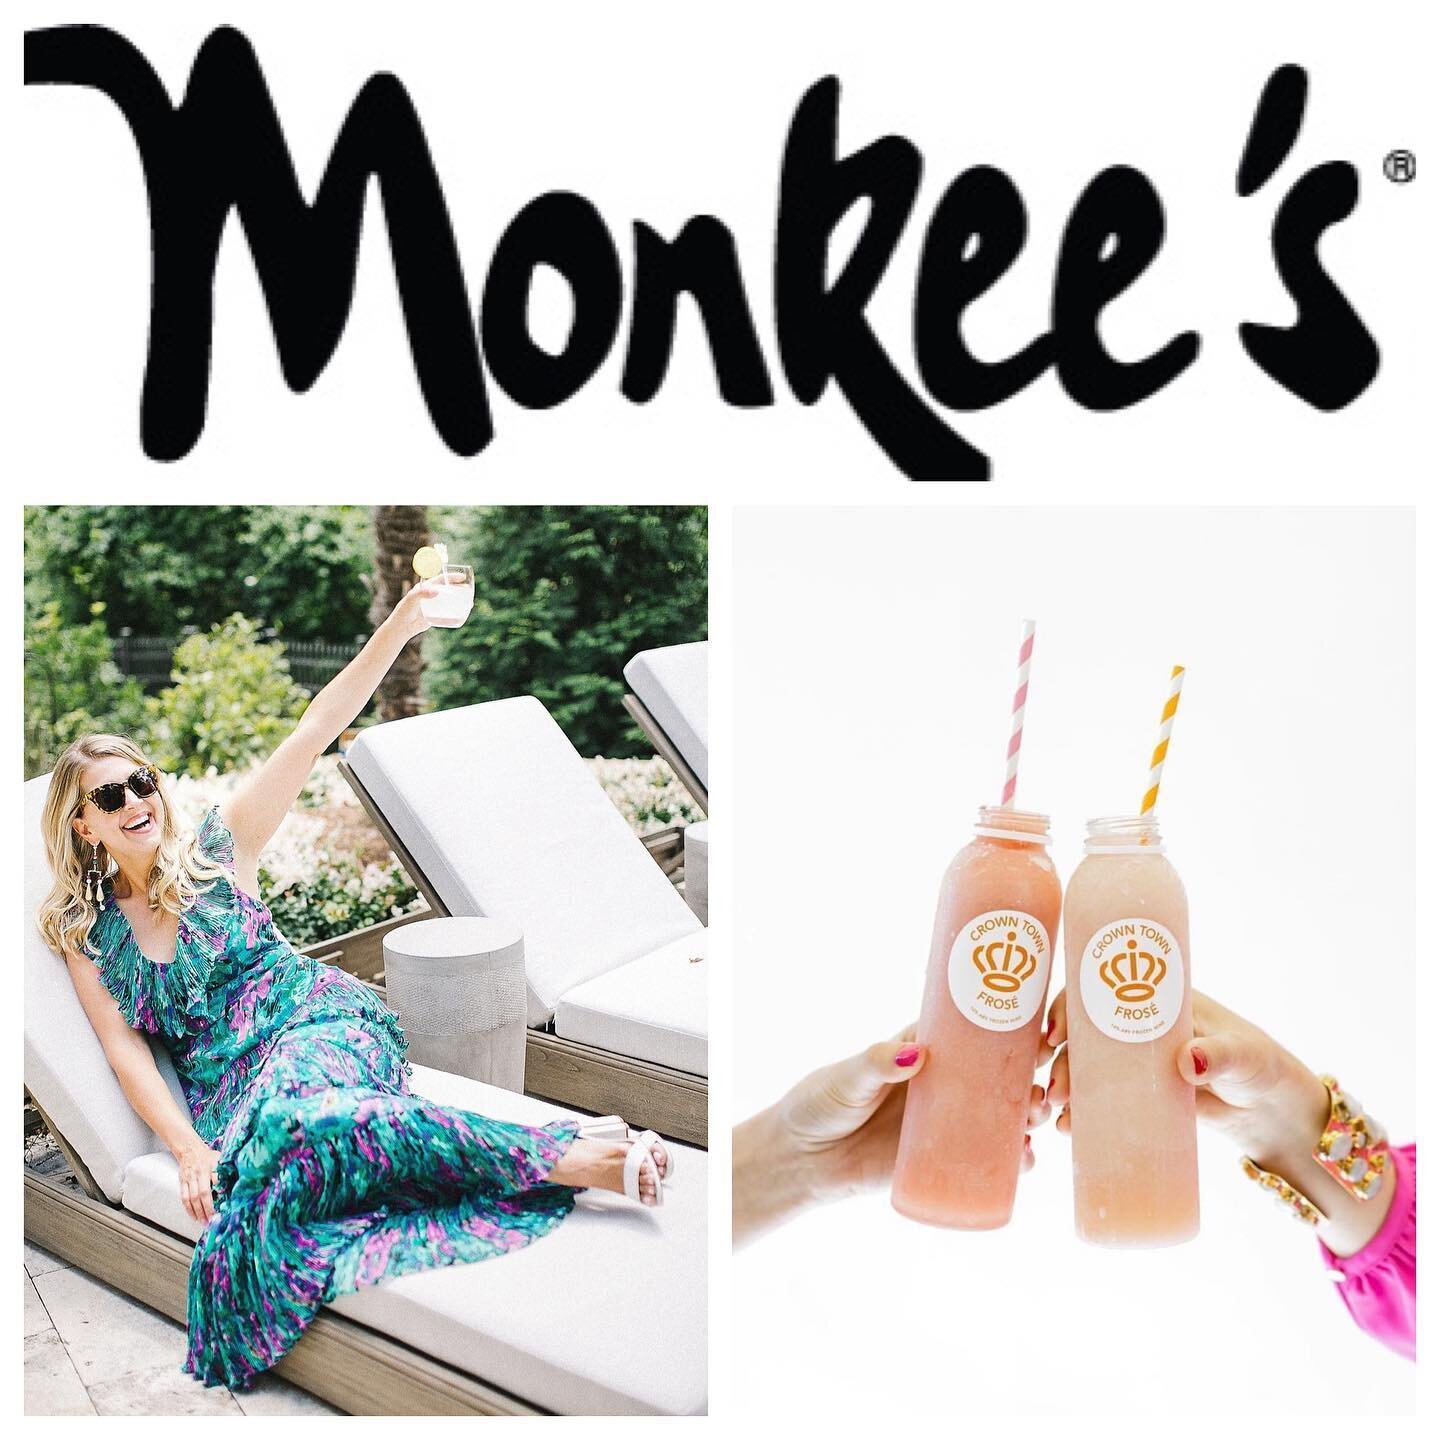 Get ready and do whatever you have to do  to make it over to @monkeesofcharlotte this Friday! I&rsquo;ll be there from 10-6 with all the new pretties for summer &amp; @crown_town_frose will be celebrating summer kick off with us from 12-6! We can&rsq